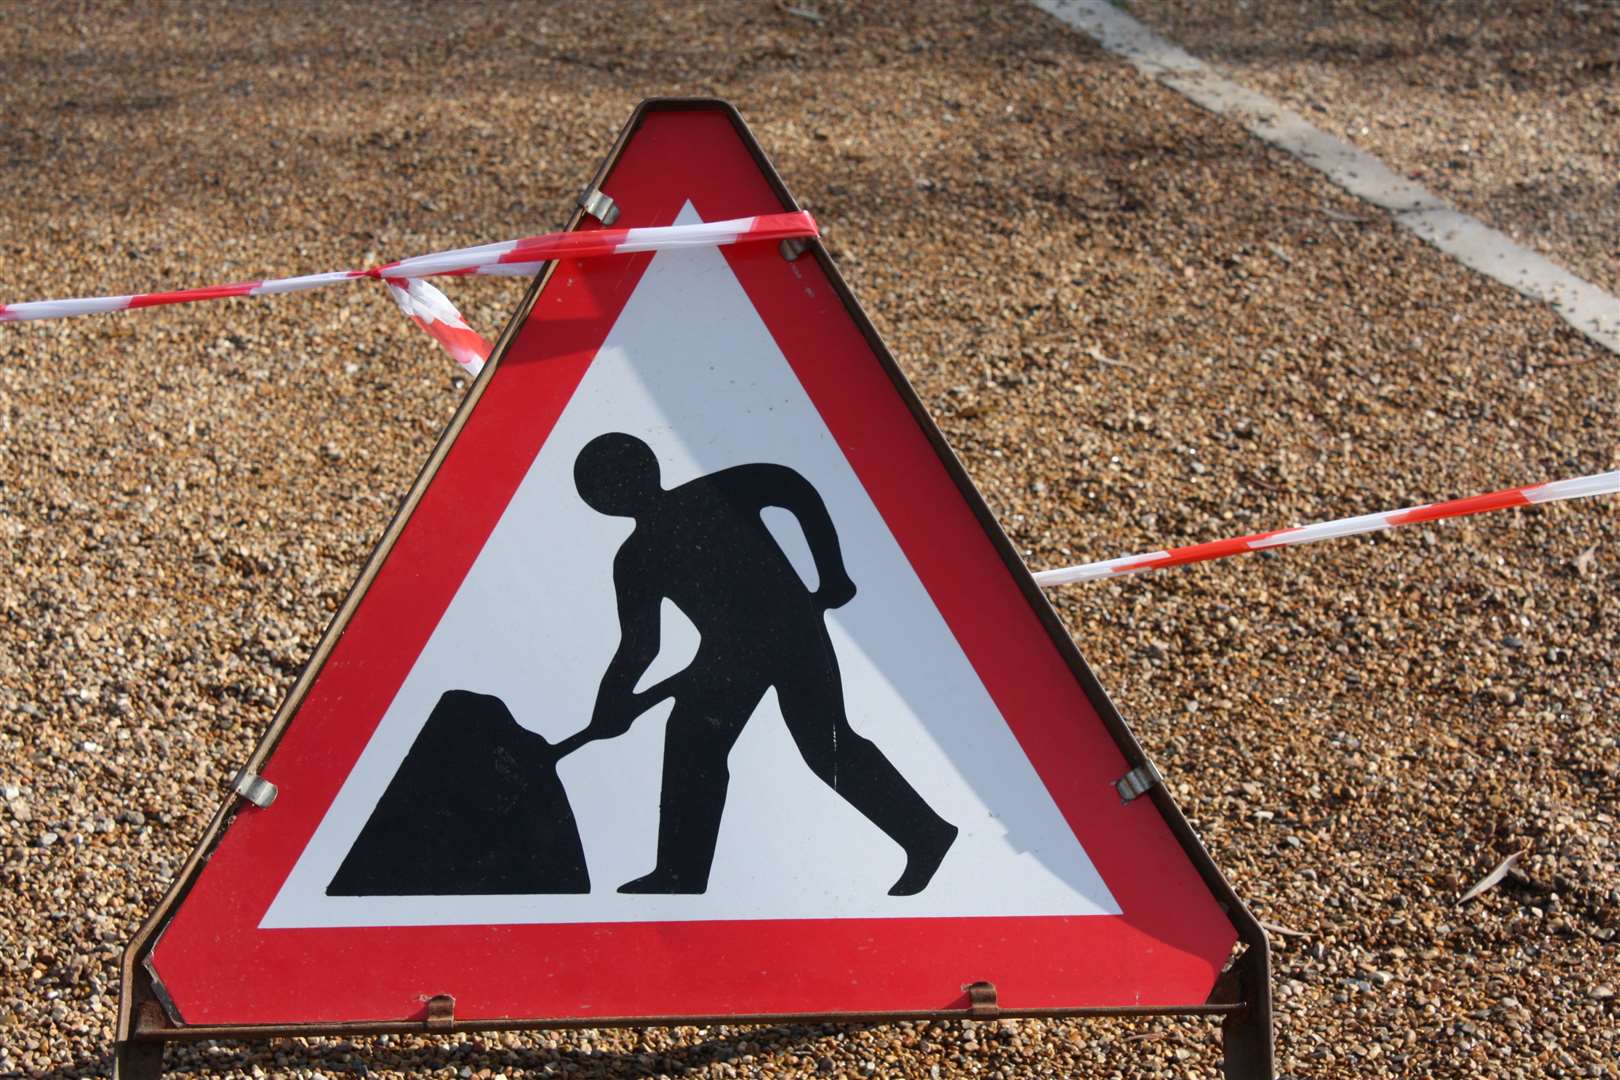 The roadworks will last for 10 weeks and start on Tuesday, May 4.